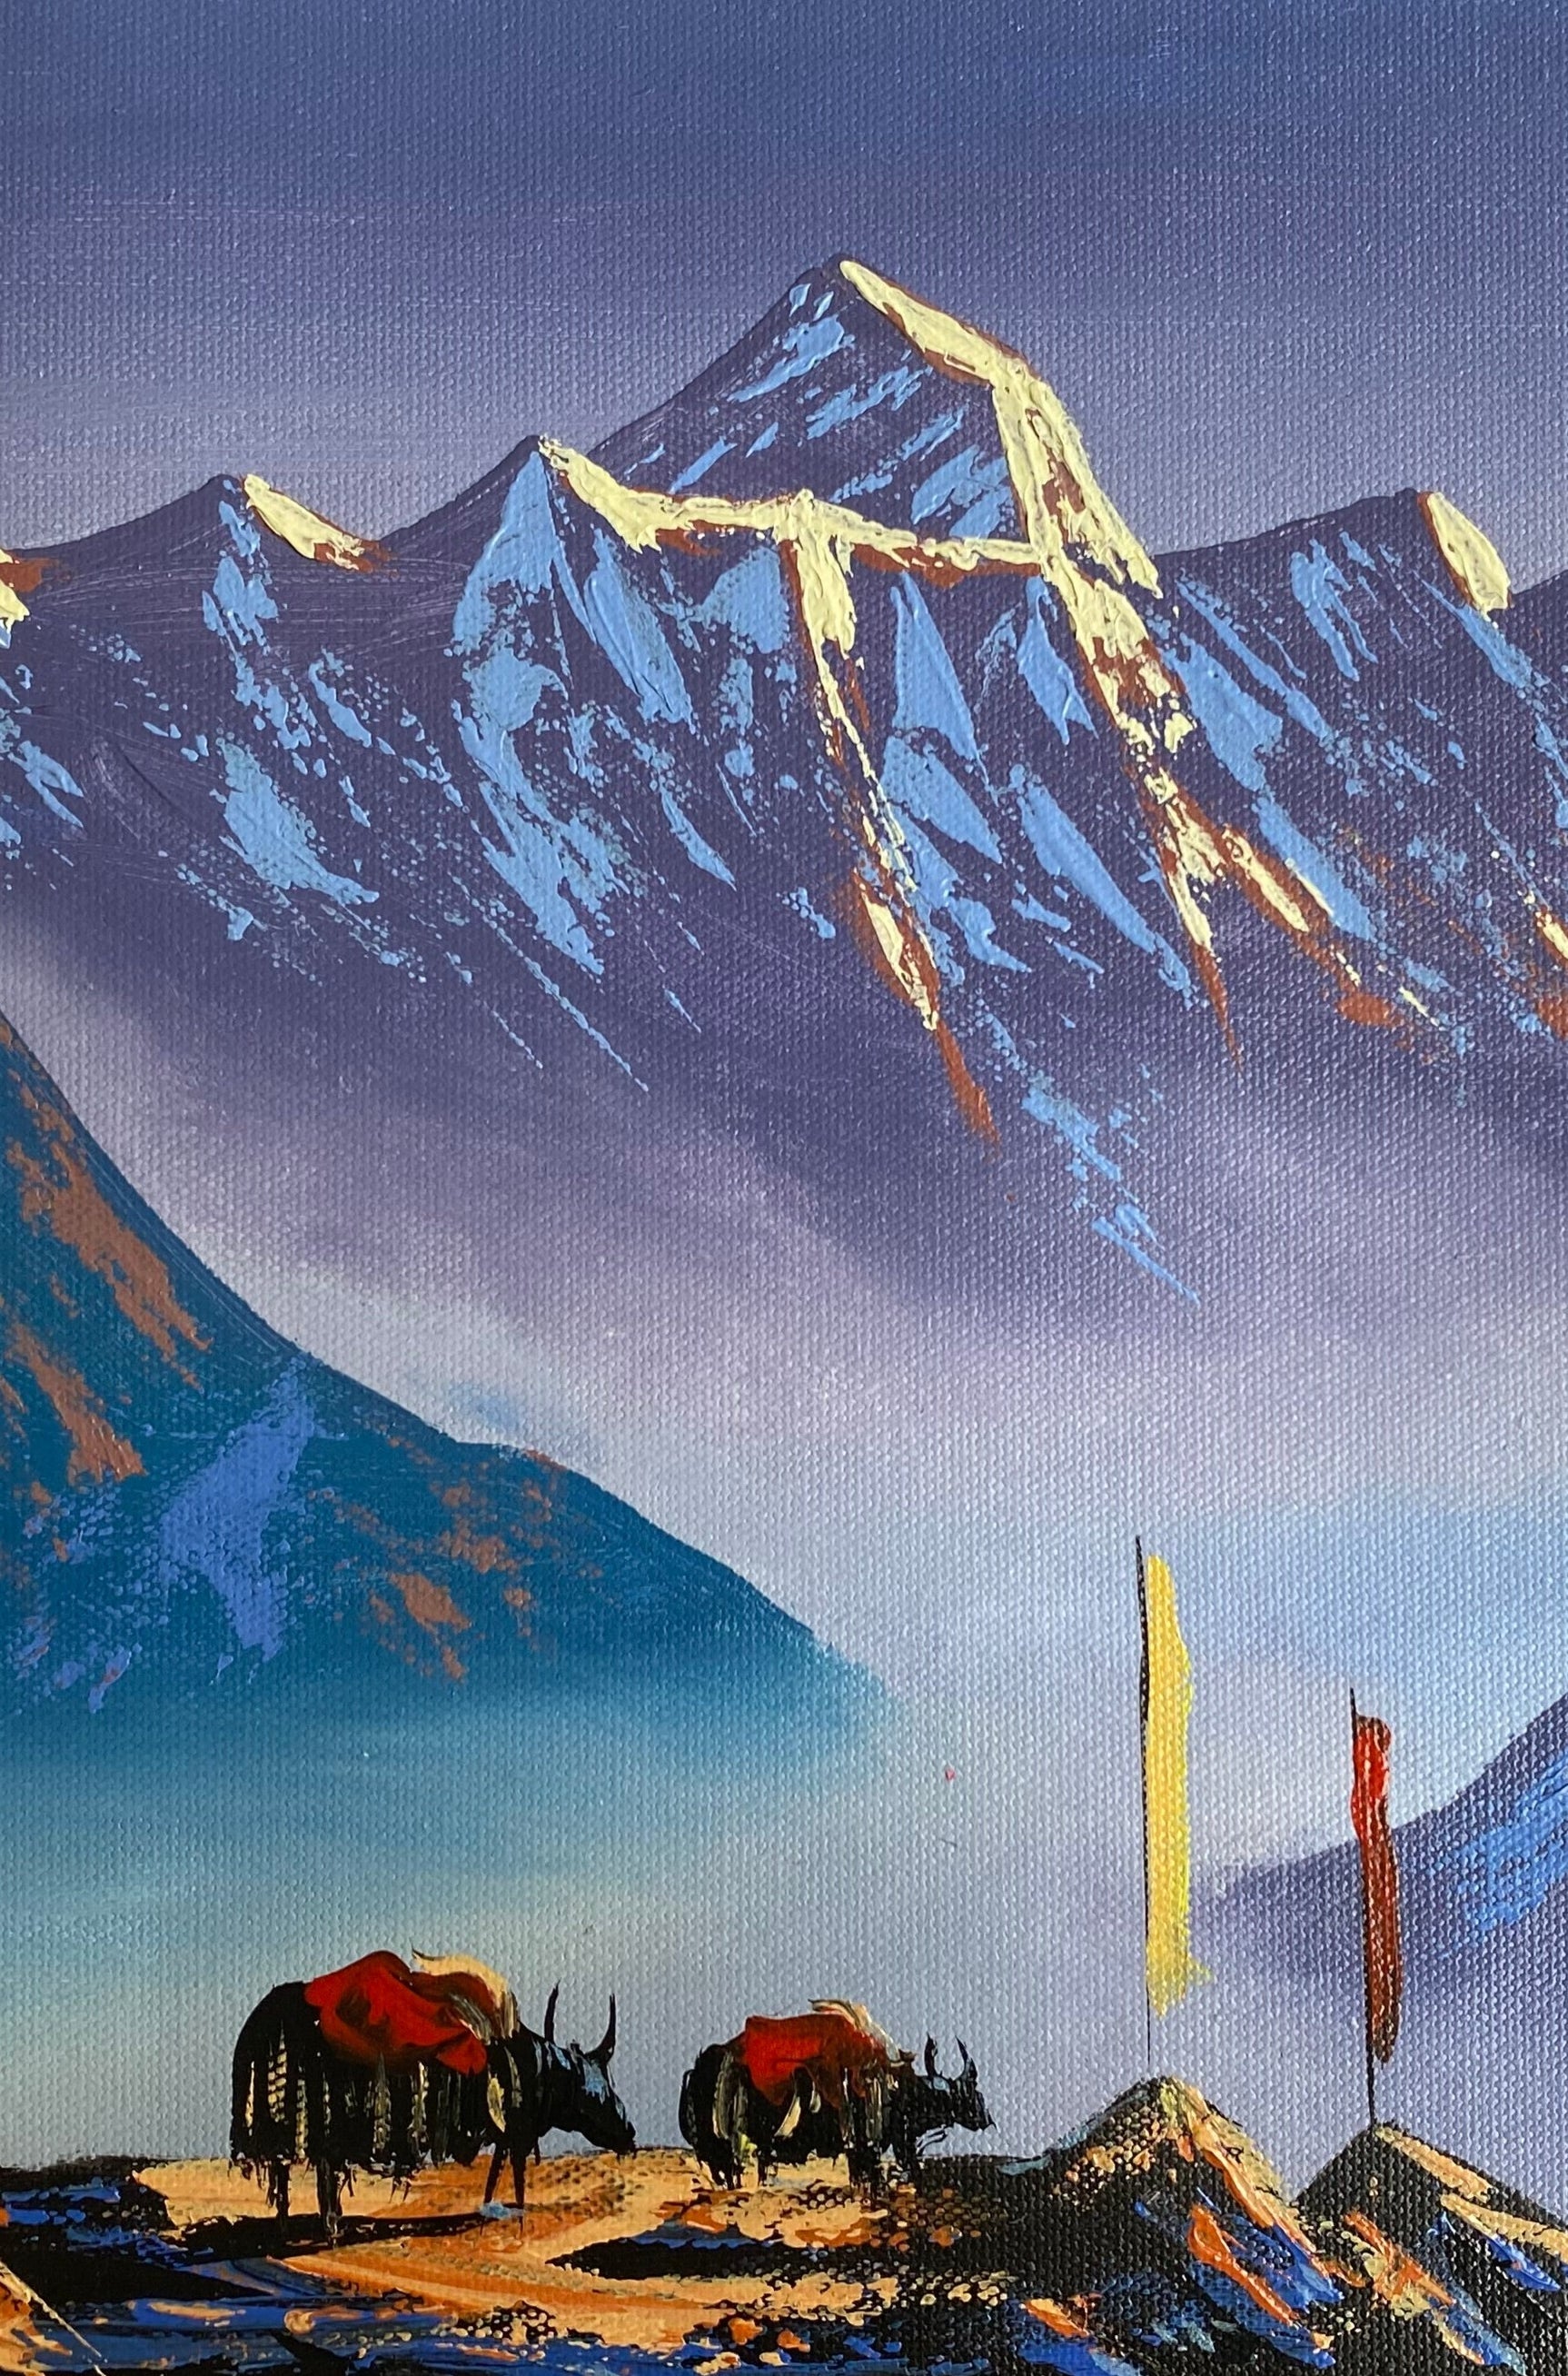 Handpainted Oil Painting of Everest.